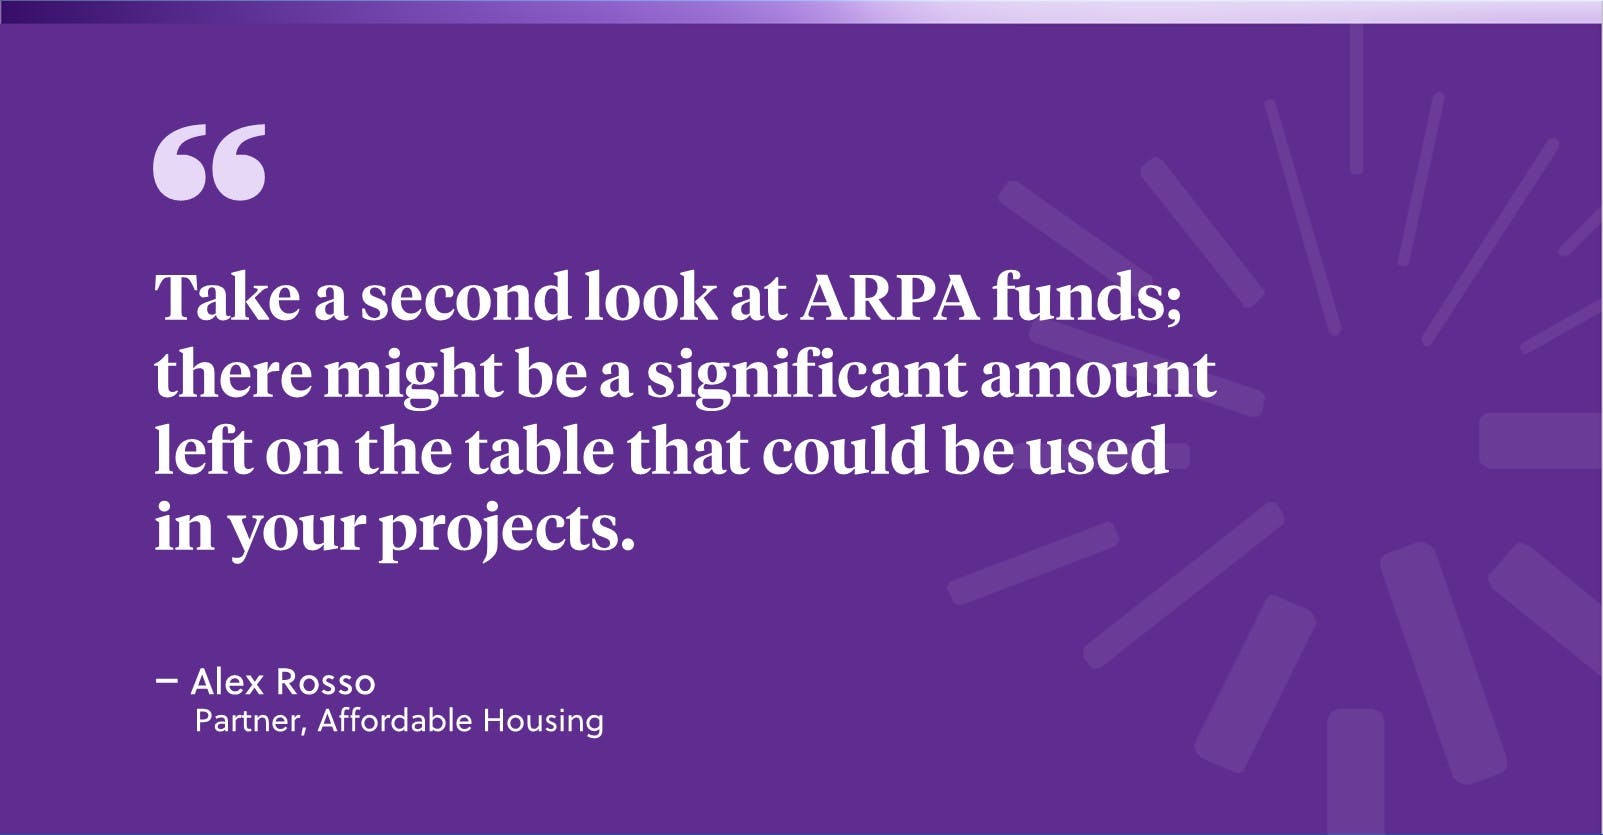 Take a second look at ARPA funds; there might be a significant amount left on the table that could be used in your projects - Alex Rosso